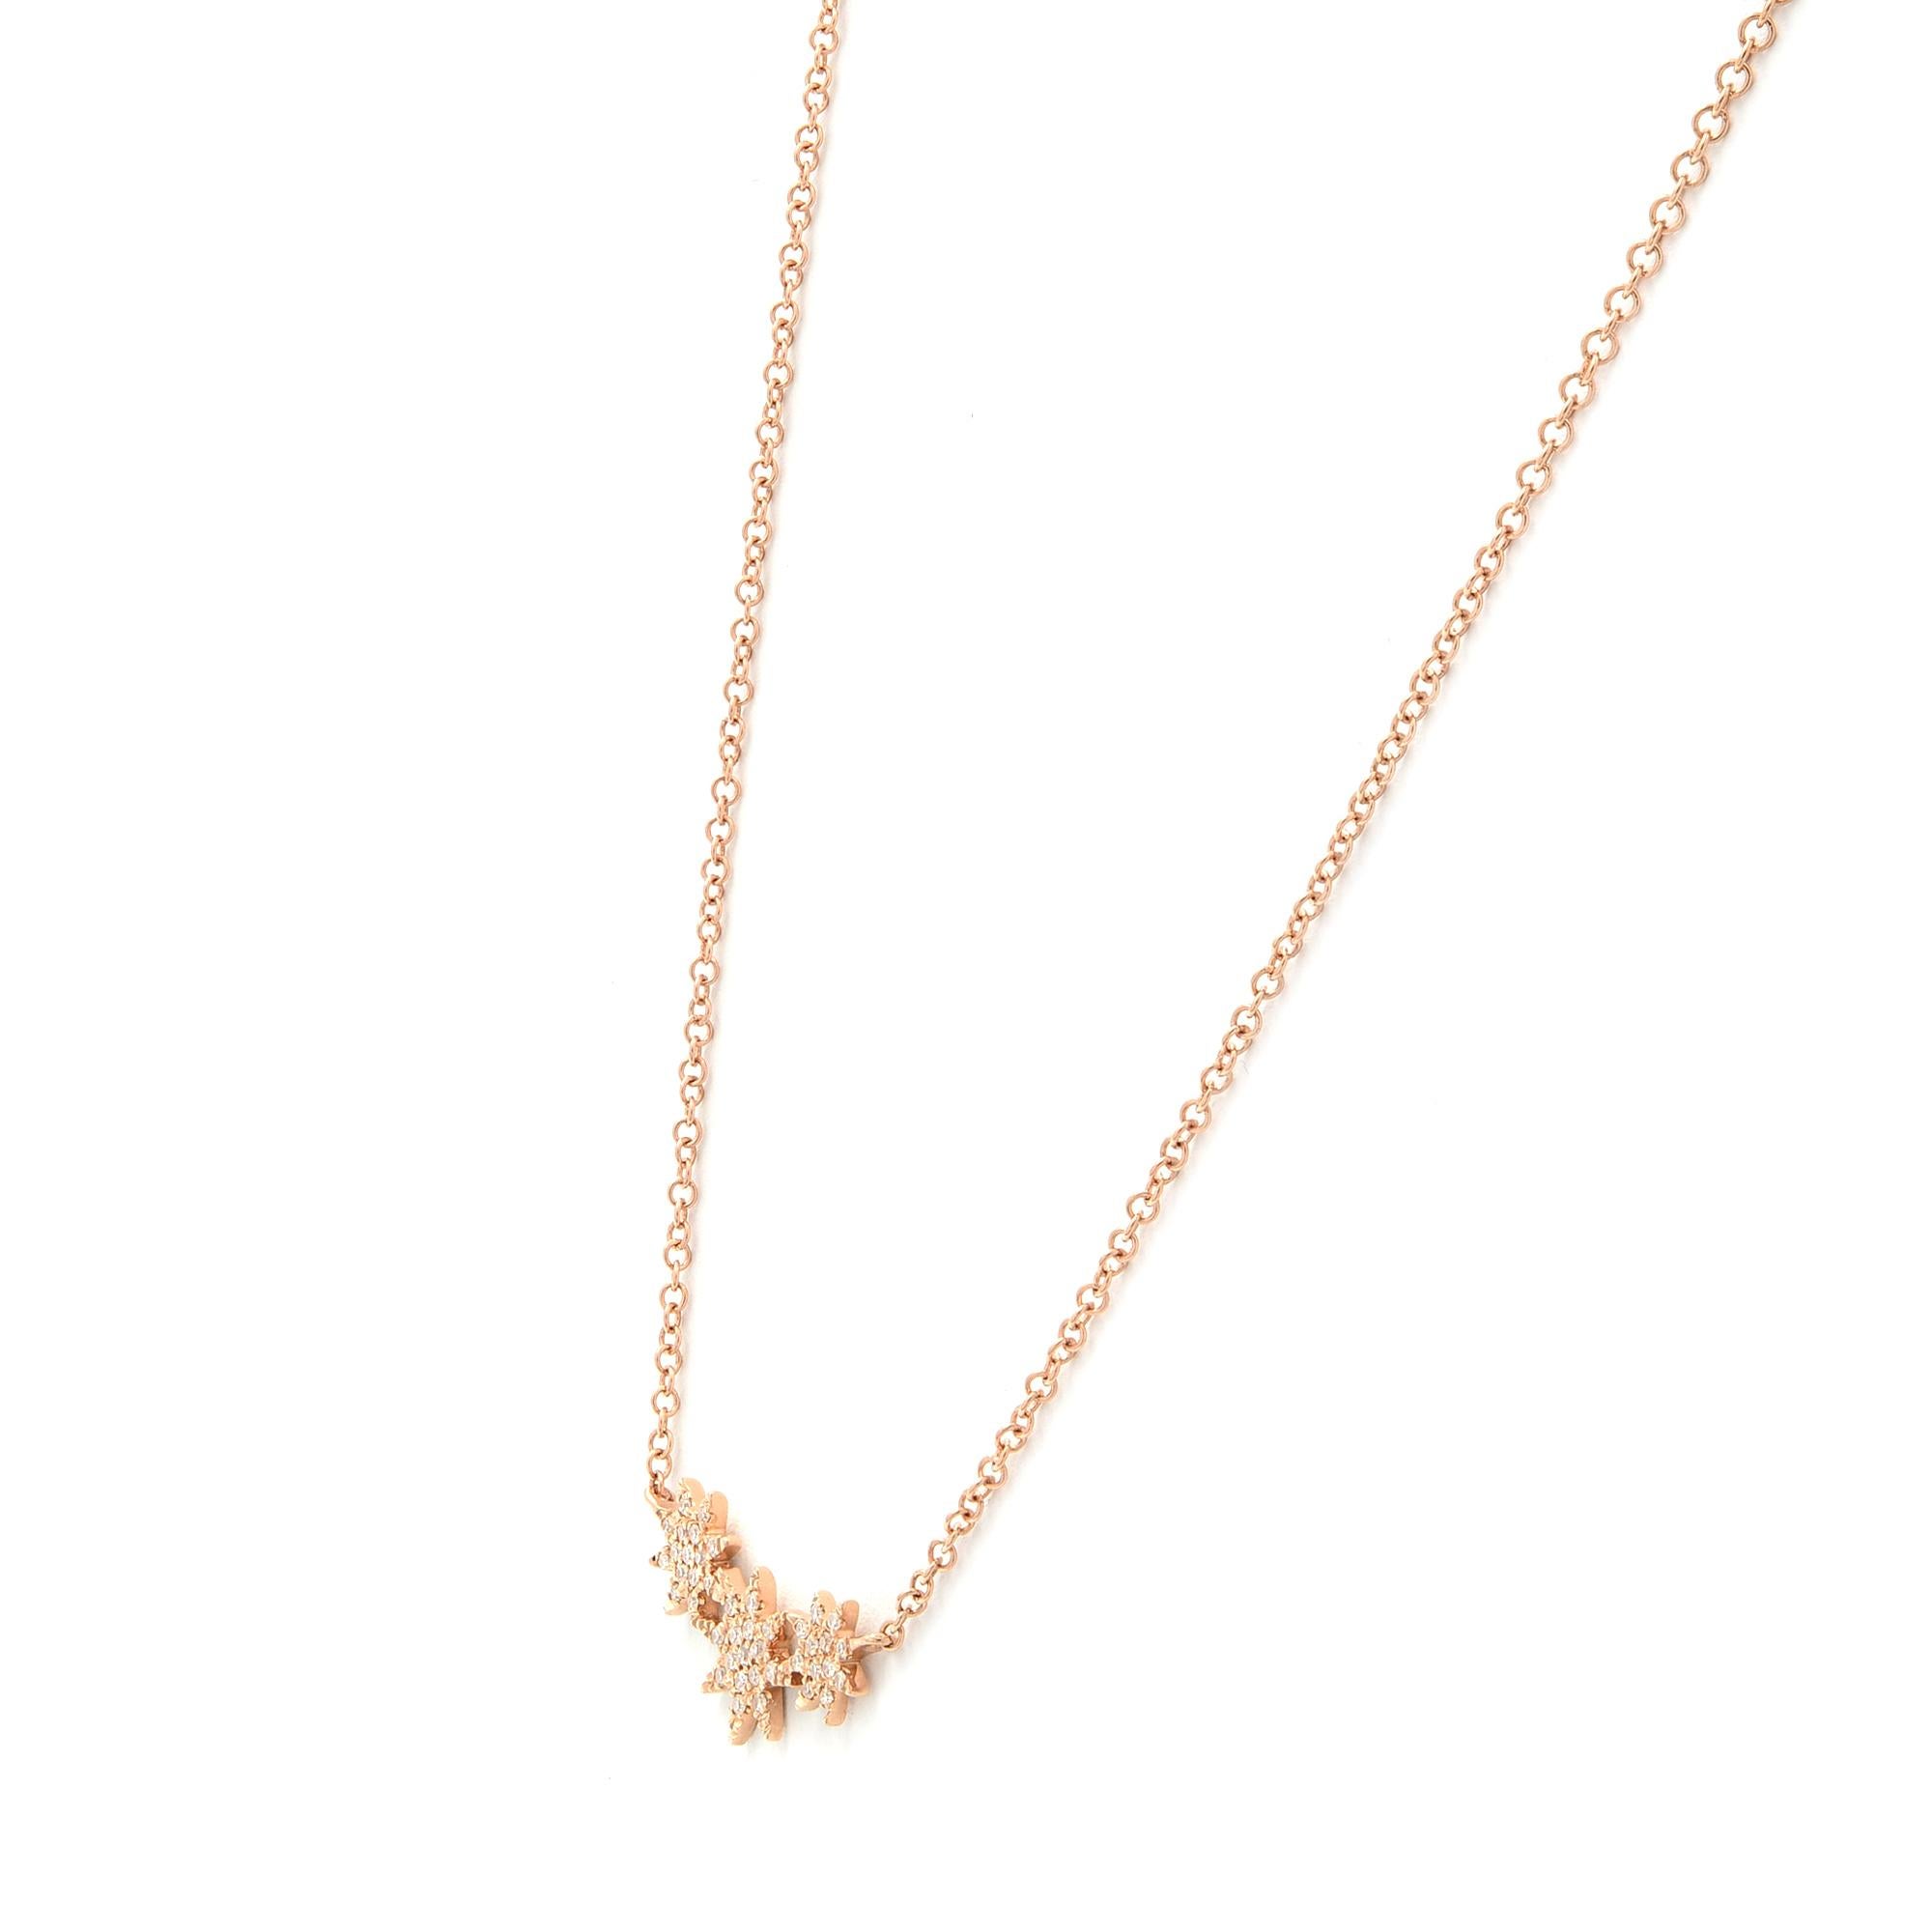 Beautiful and delicate this precious diamond necklace will leave everyone speechless the moment they see it. Crafted in high polished solid 14k rose gold. This necklace is pave set with brilliant round cut diamonds of G-H color and clean VS clarity.